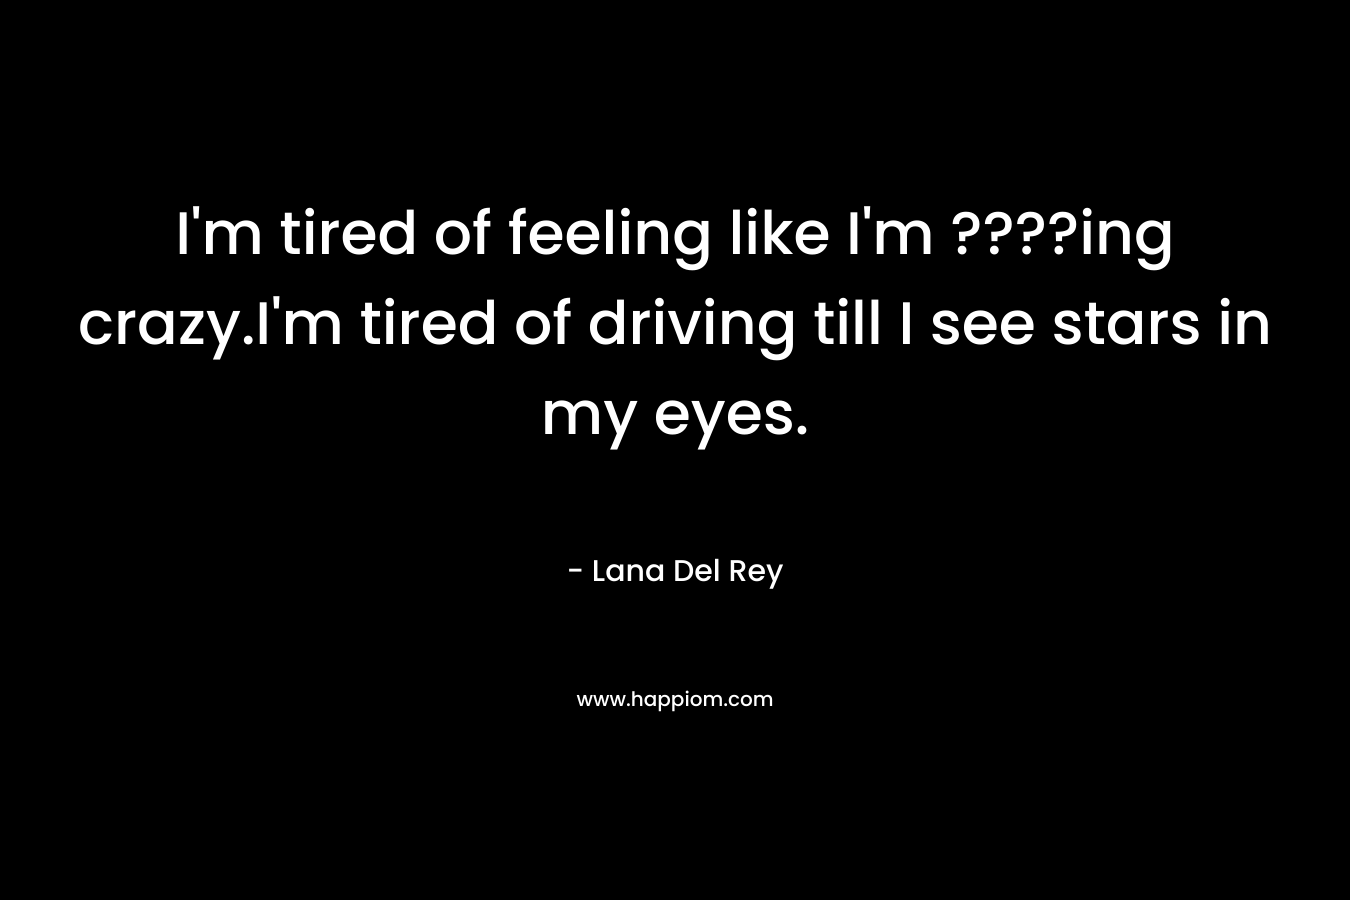 I'm tired of feeling like I'm ????ing crazy.I'm tired of driving till I see stars in my eyes.